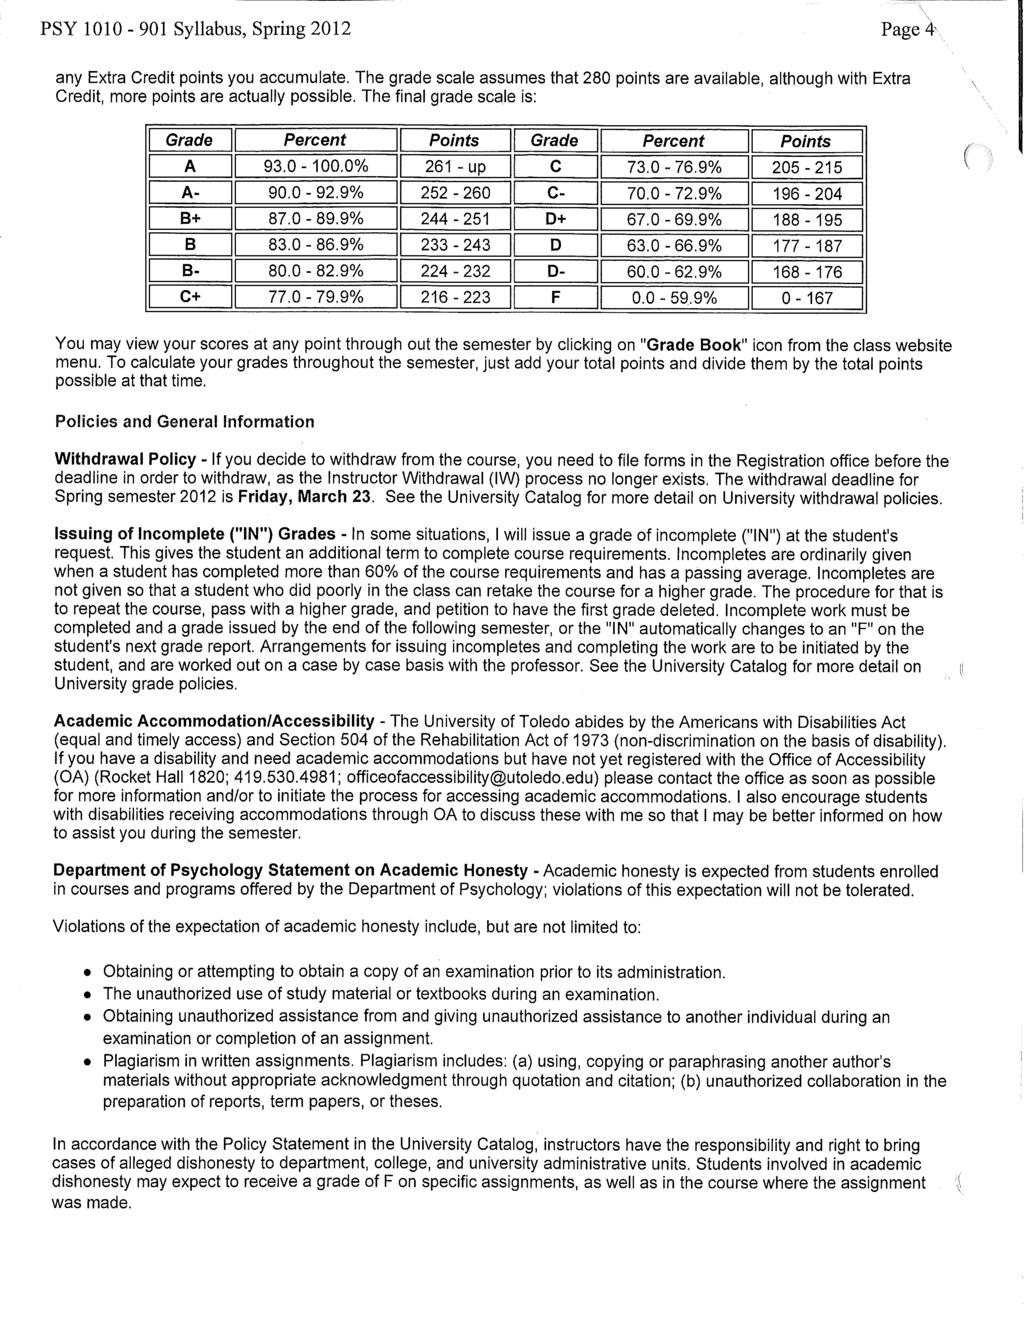 PSY 1010-901 Syllabus, Spring 2012 Page 4' any Extra Credit points you accumulate. The grade scale assumes that 280 points are available, although with Extra Credit, more points are actually possible.